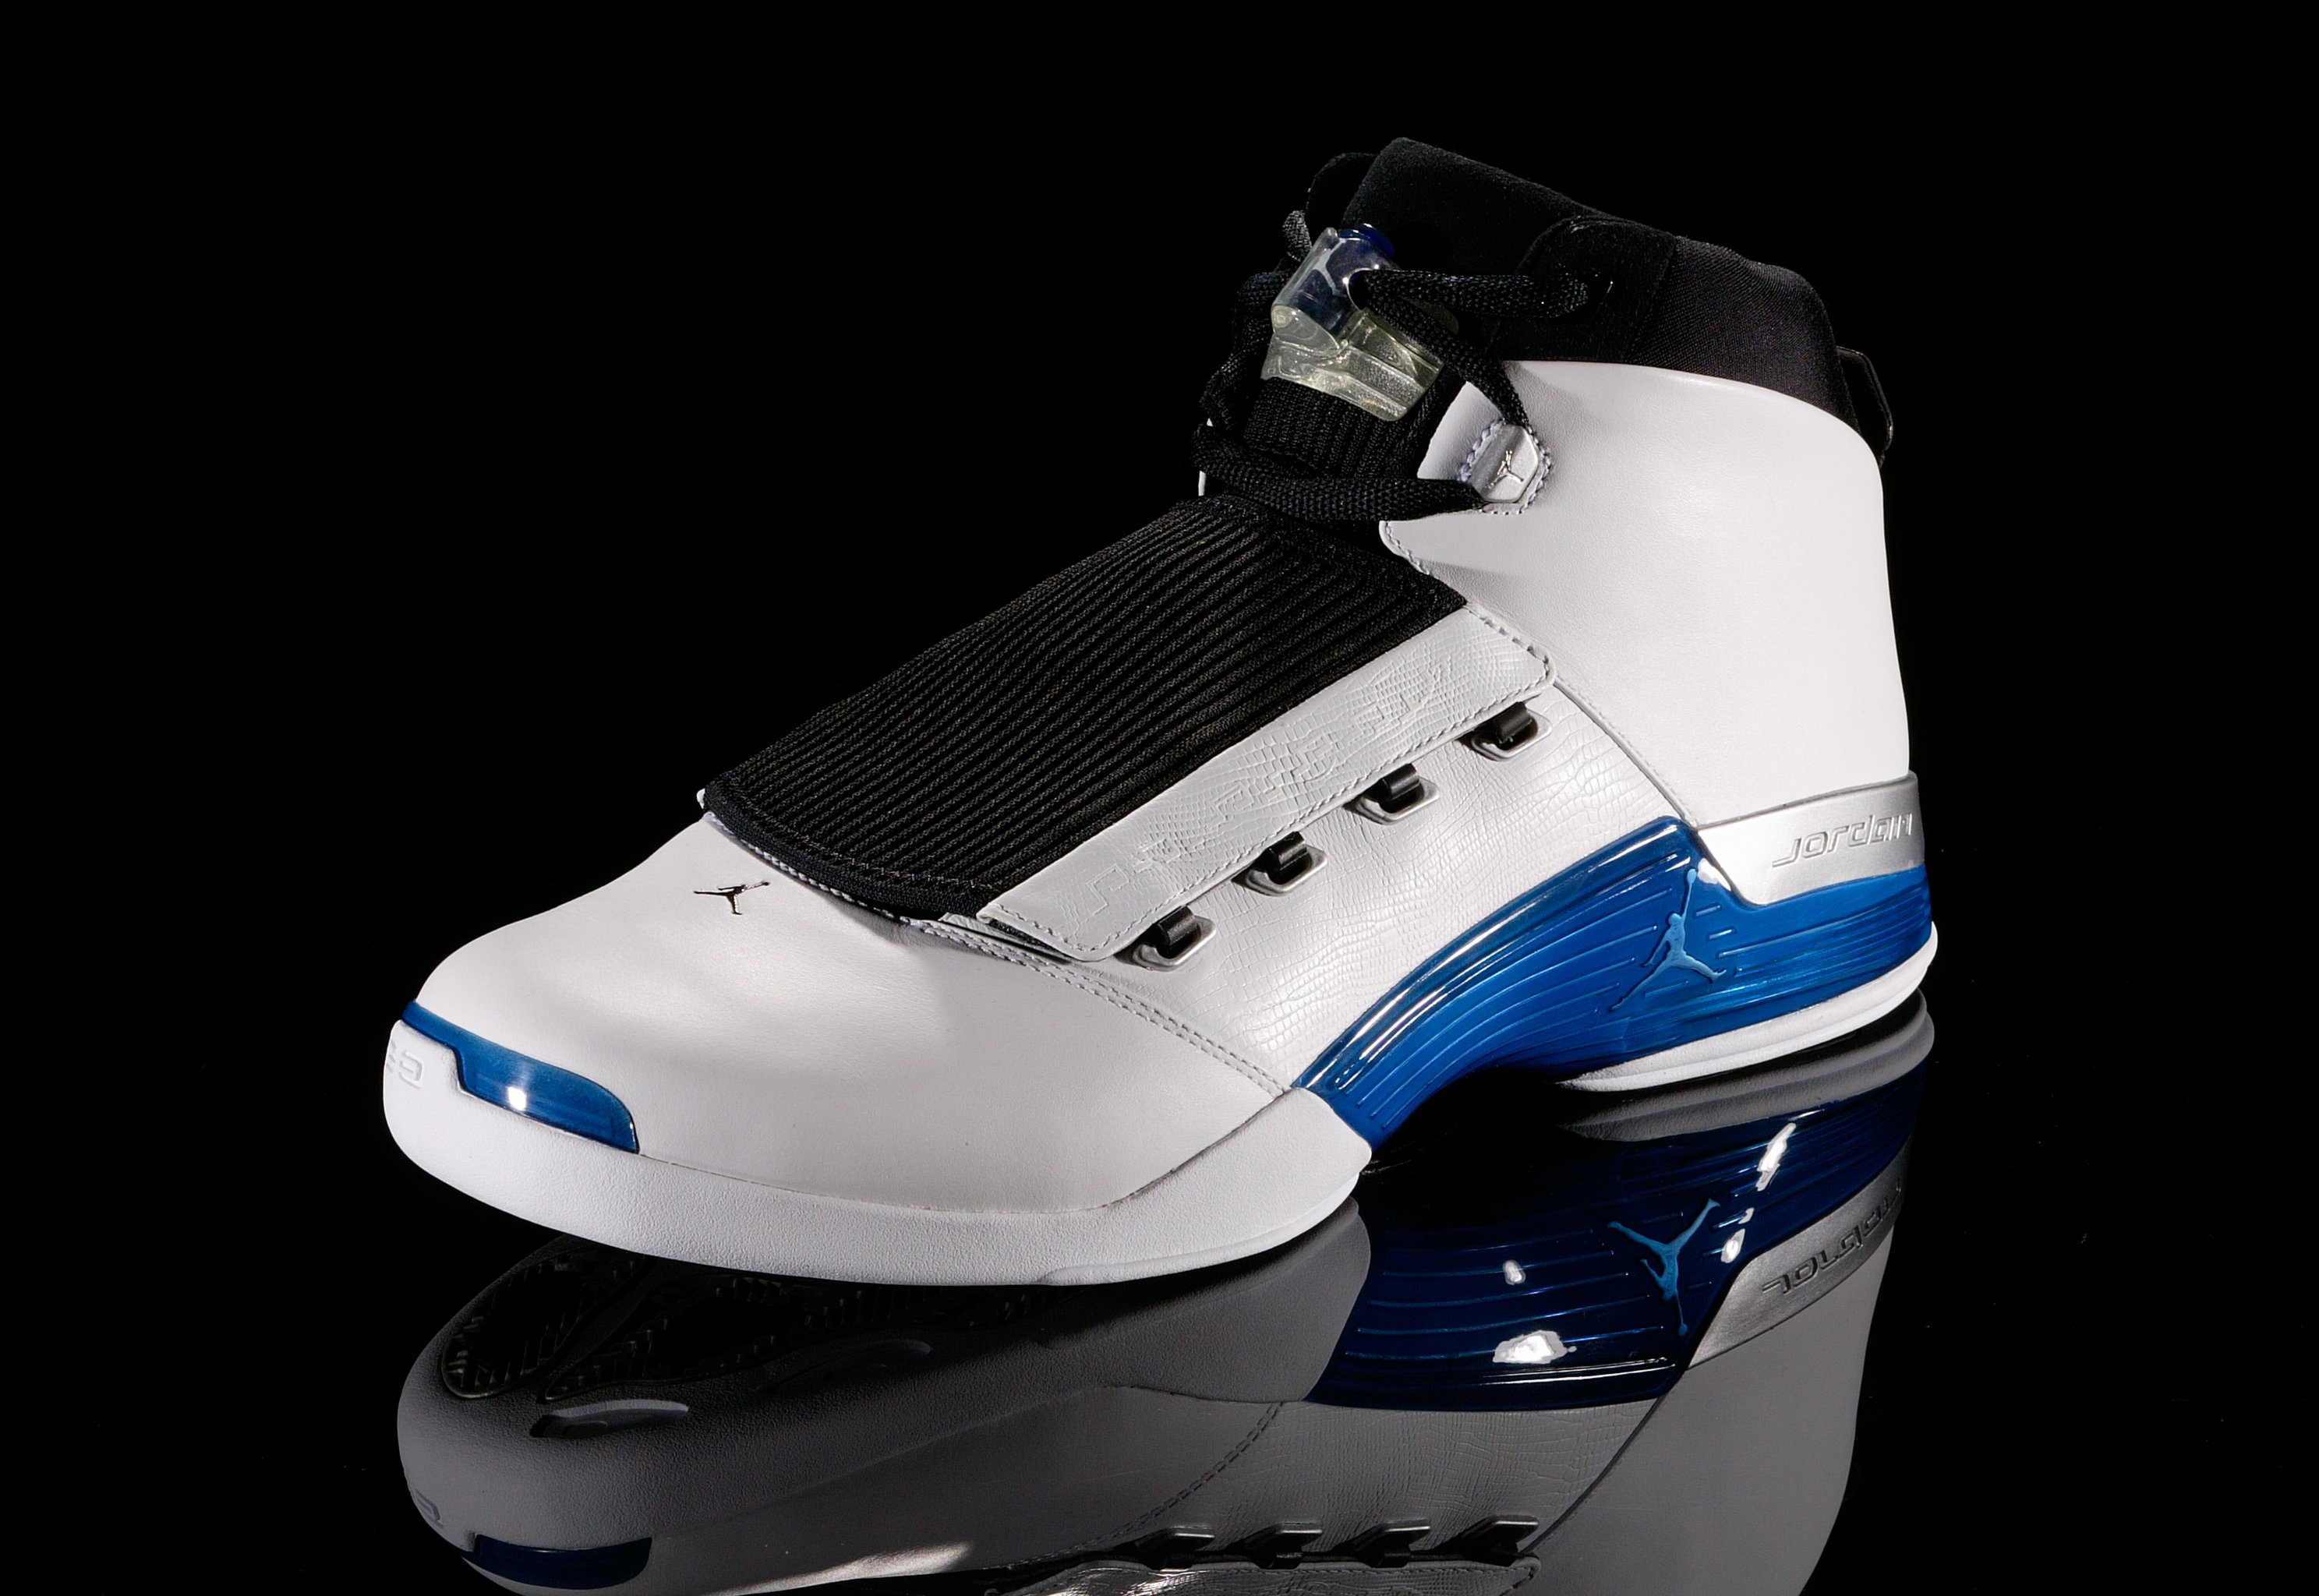 Does Penny Hardaway Have the Best Signature Shoes Behind Jordan